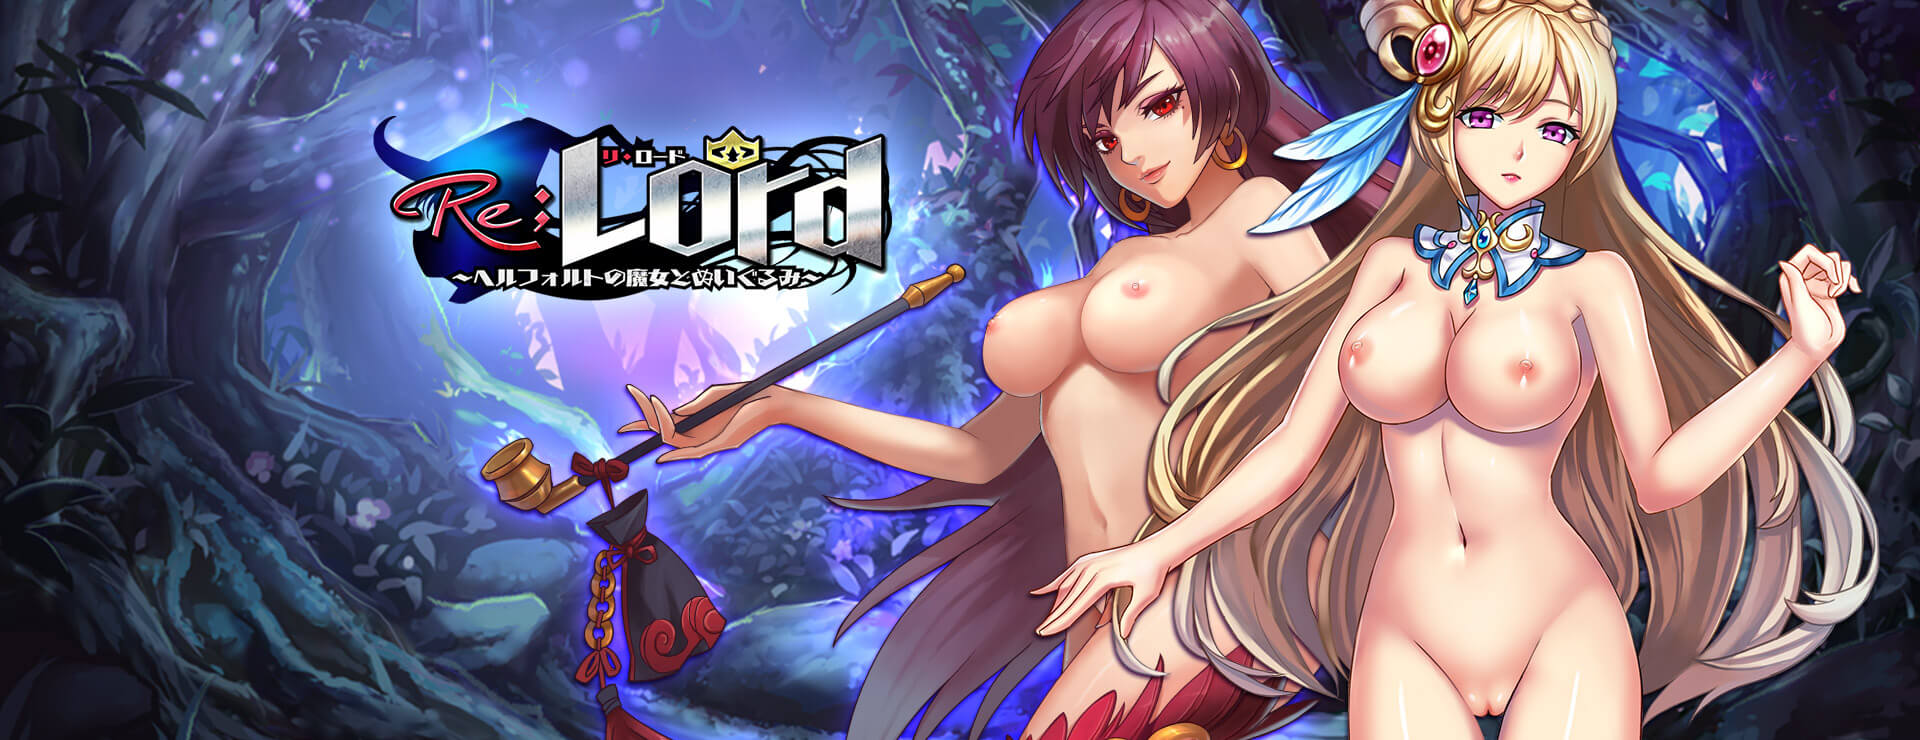 Re:Lord 1 - RPG ゲーム